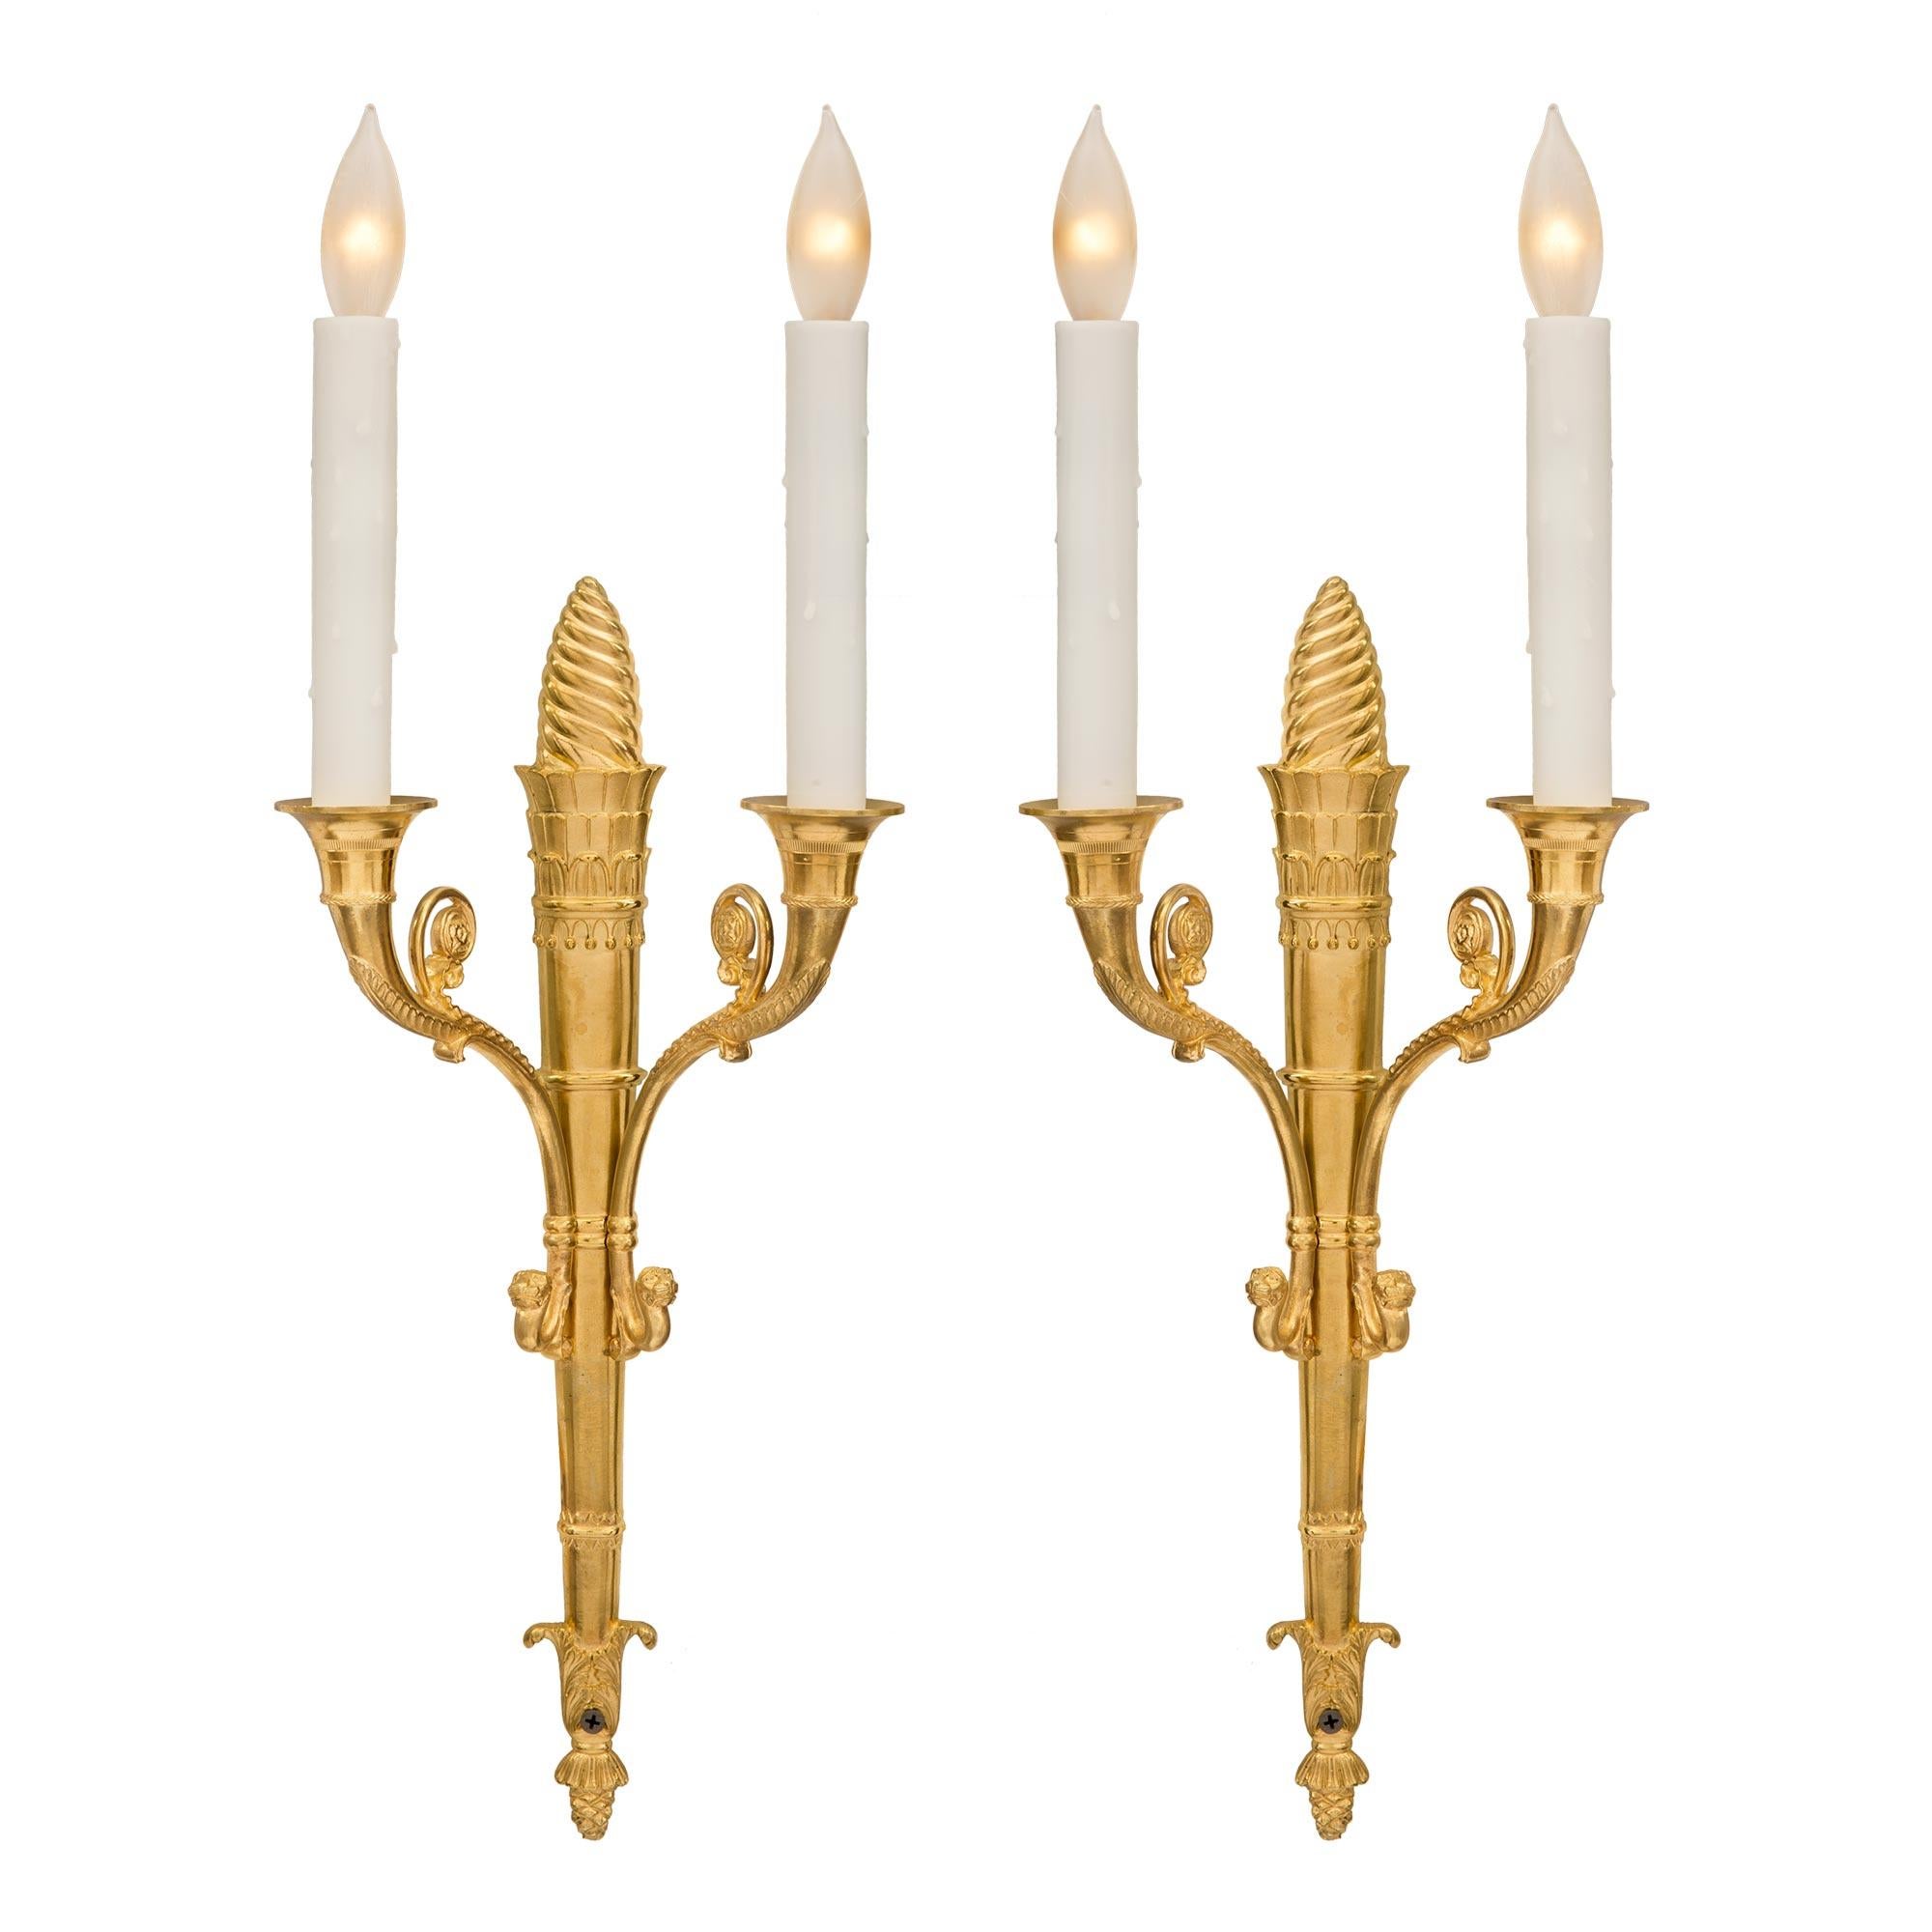 An elegant pair of French 19th century Neoclassical two arm ormolu sconces. Each sconce is centered by a Fine bottom acorn finial adorned with acanthus leaves. The tapered central fut is in the shape of a quiver and displays a striking spiraled top